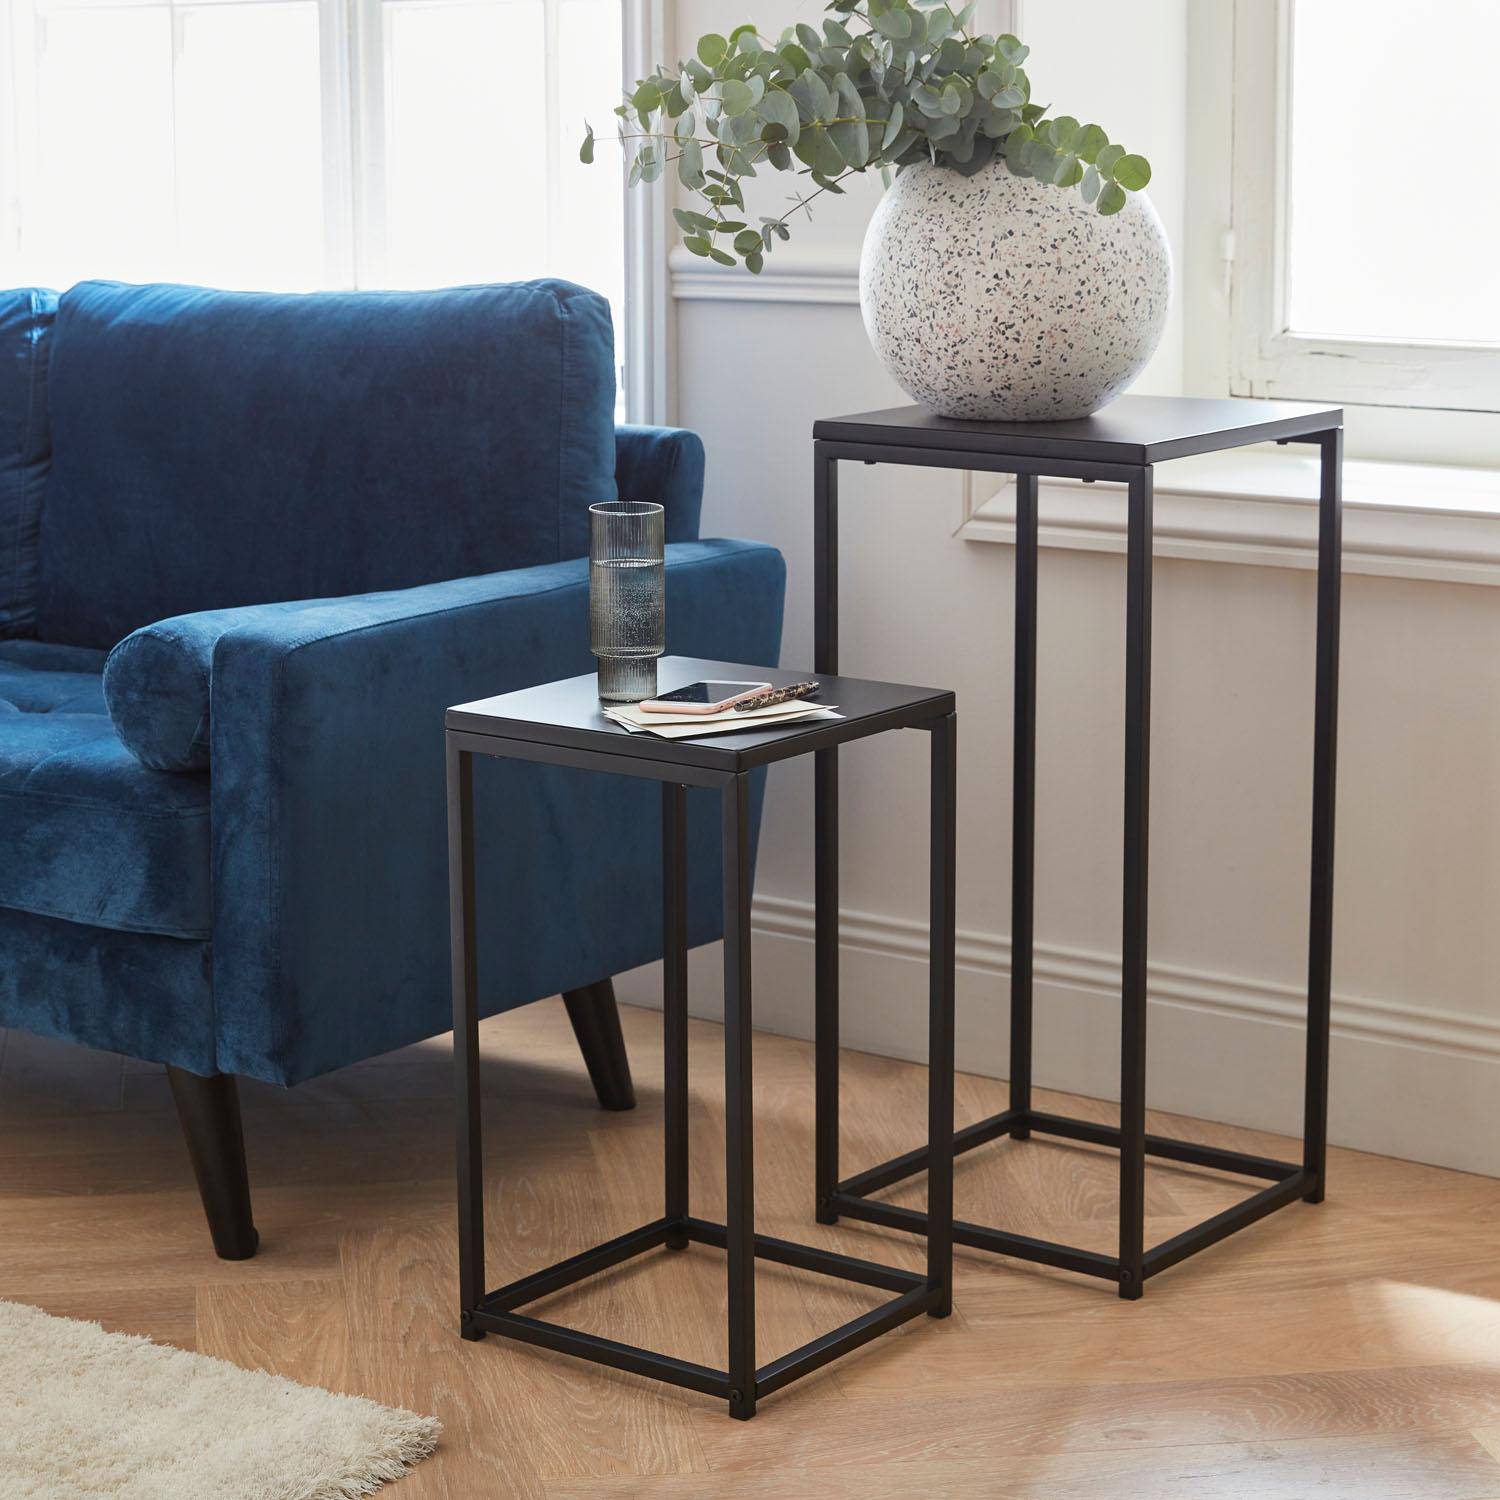 Set of 2 side tables/ end of sofa , Industrielle, Black,sweeek,Photo1